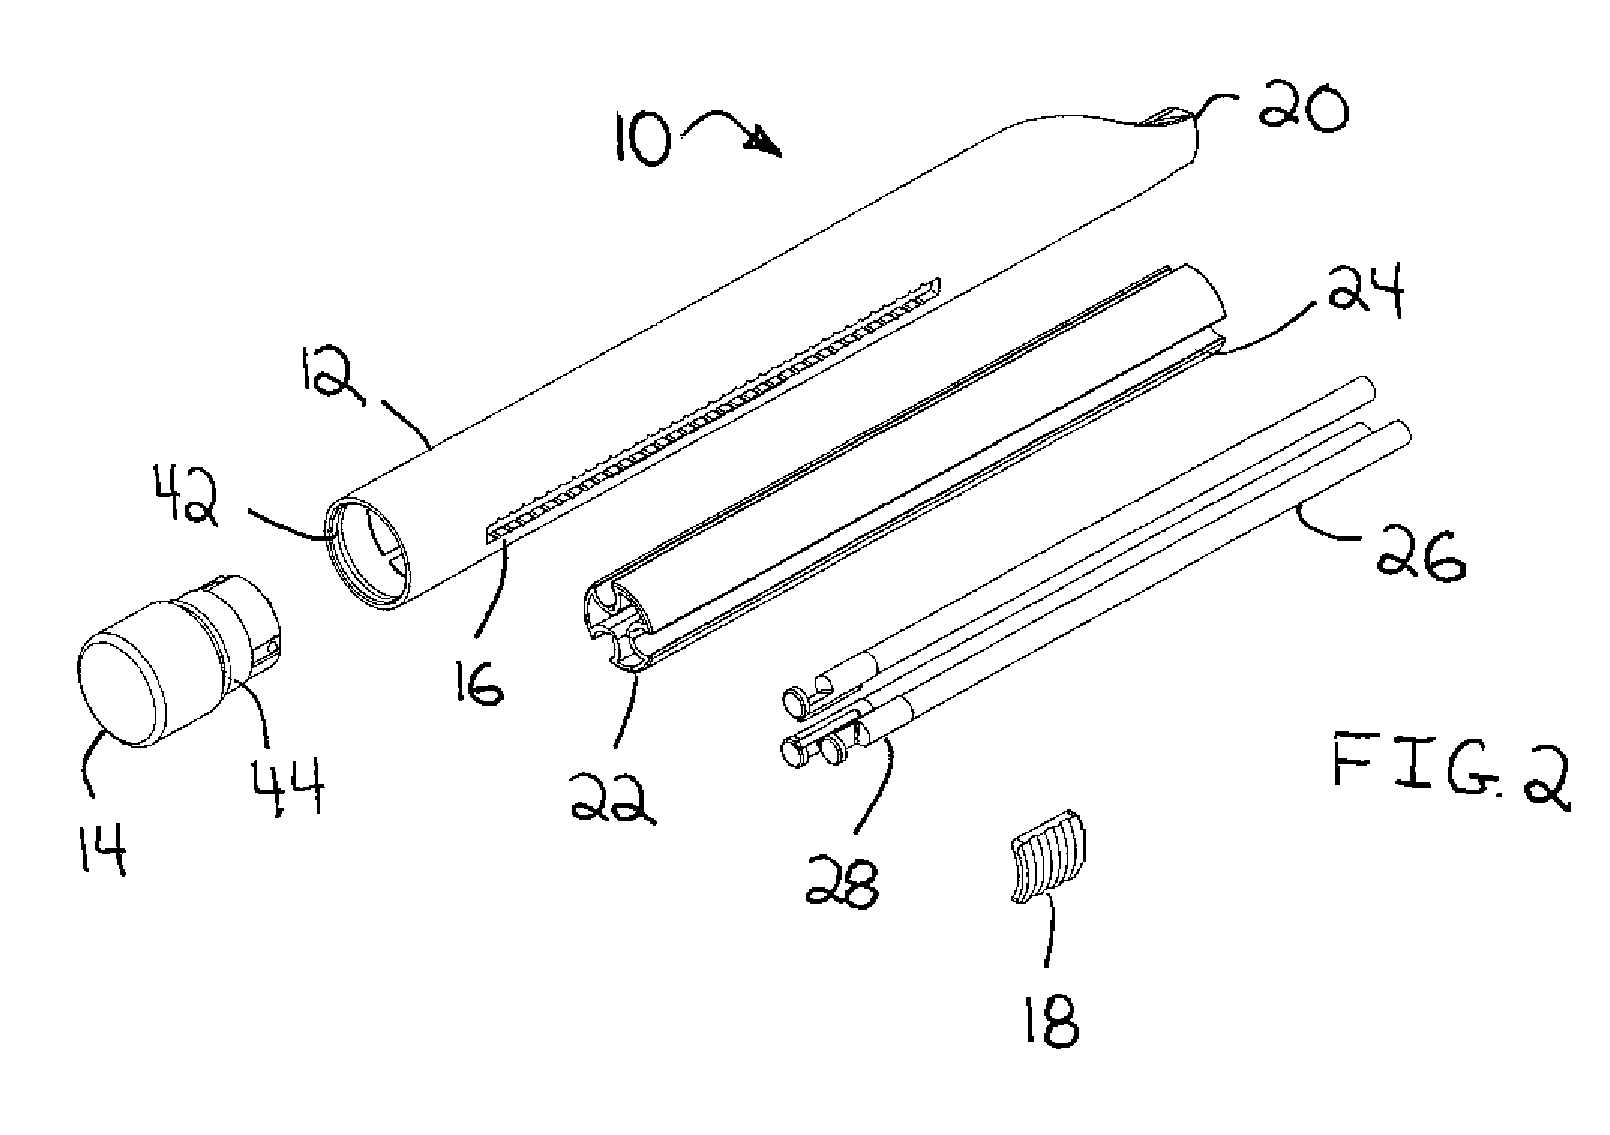 Multi-cosmetic, extendable and retractable cosmetic applicator